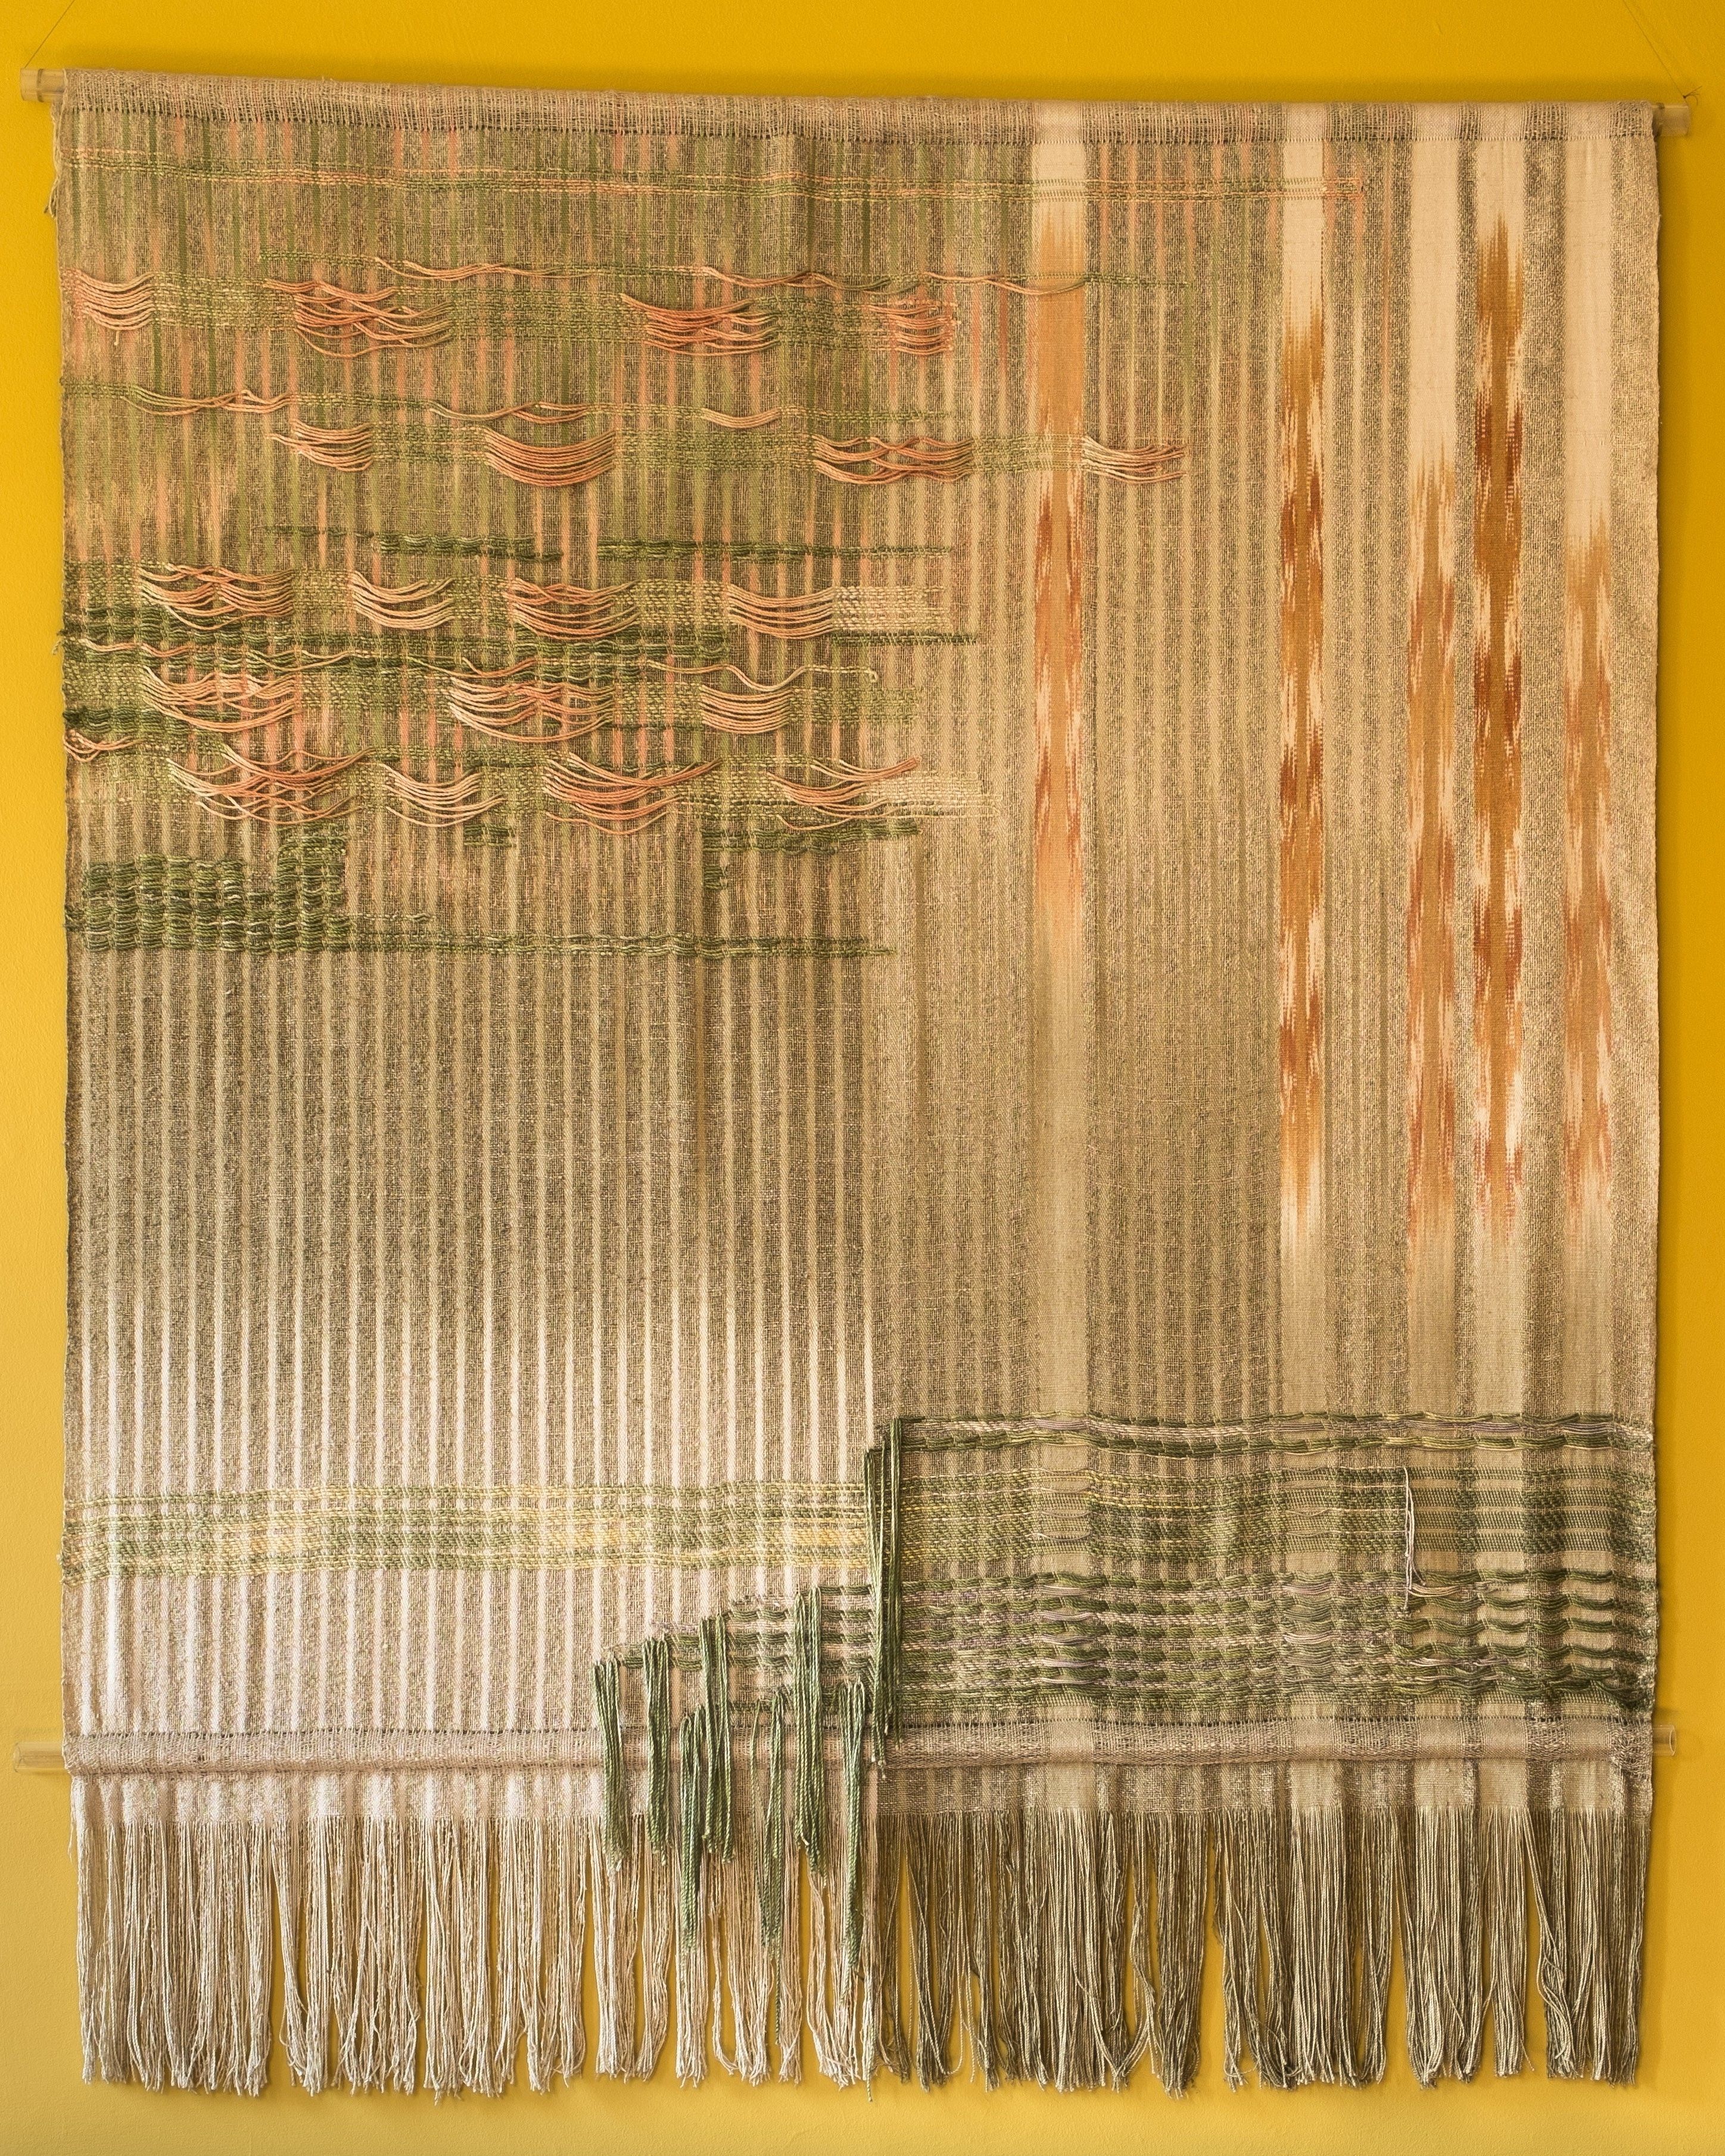 Textile Wall Art Intended For Widely Used Beyond The Garden Wall – Textile Wall Hangingheidi Lichterman (View 12 of 15)